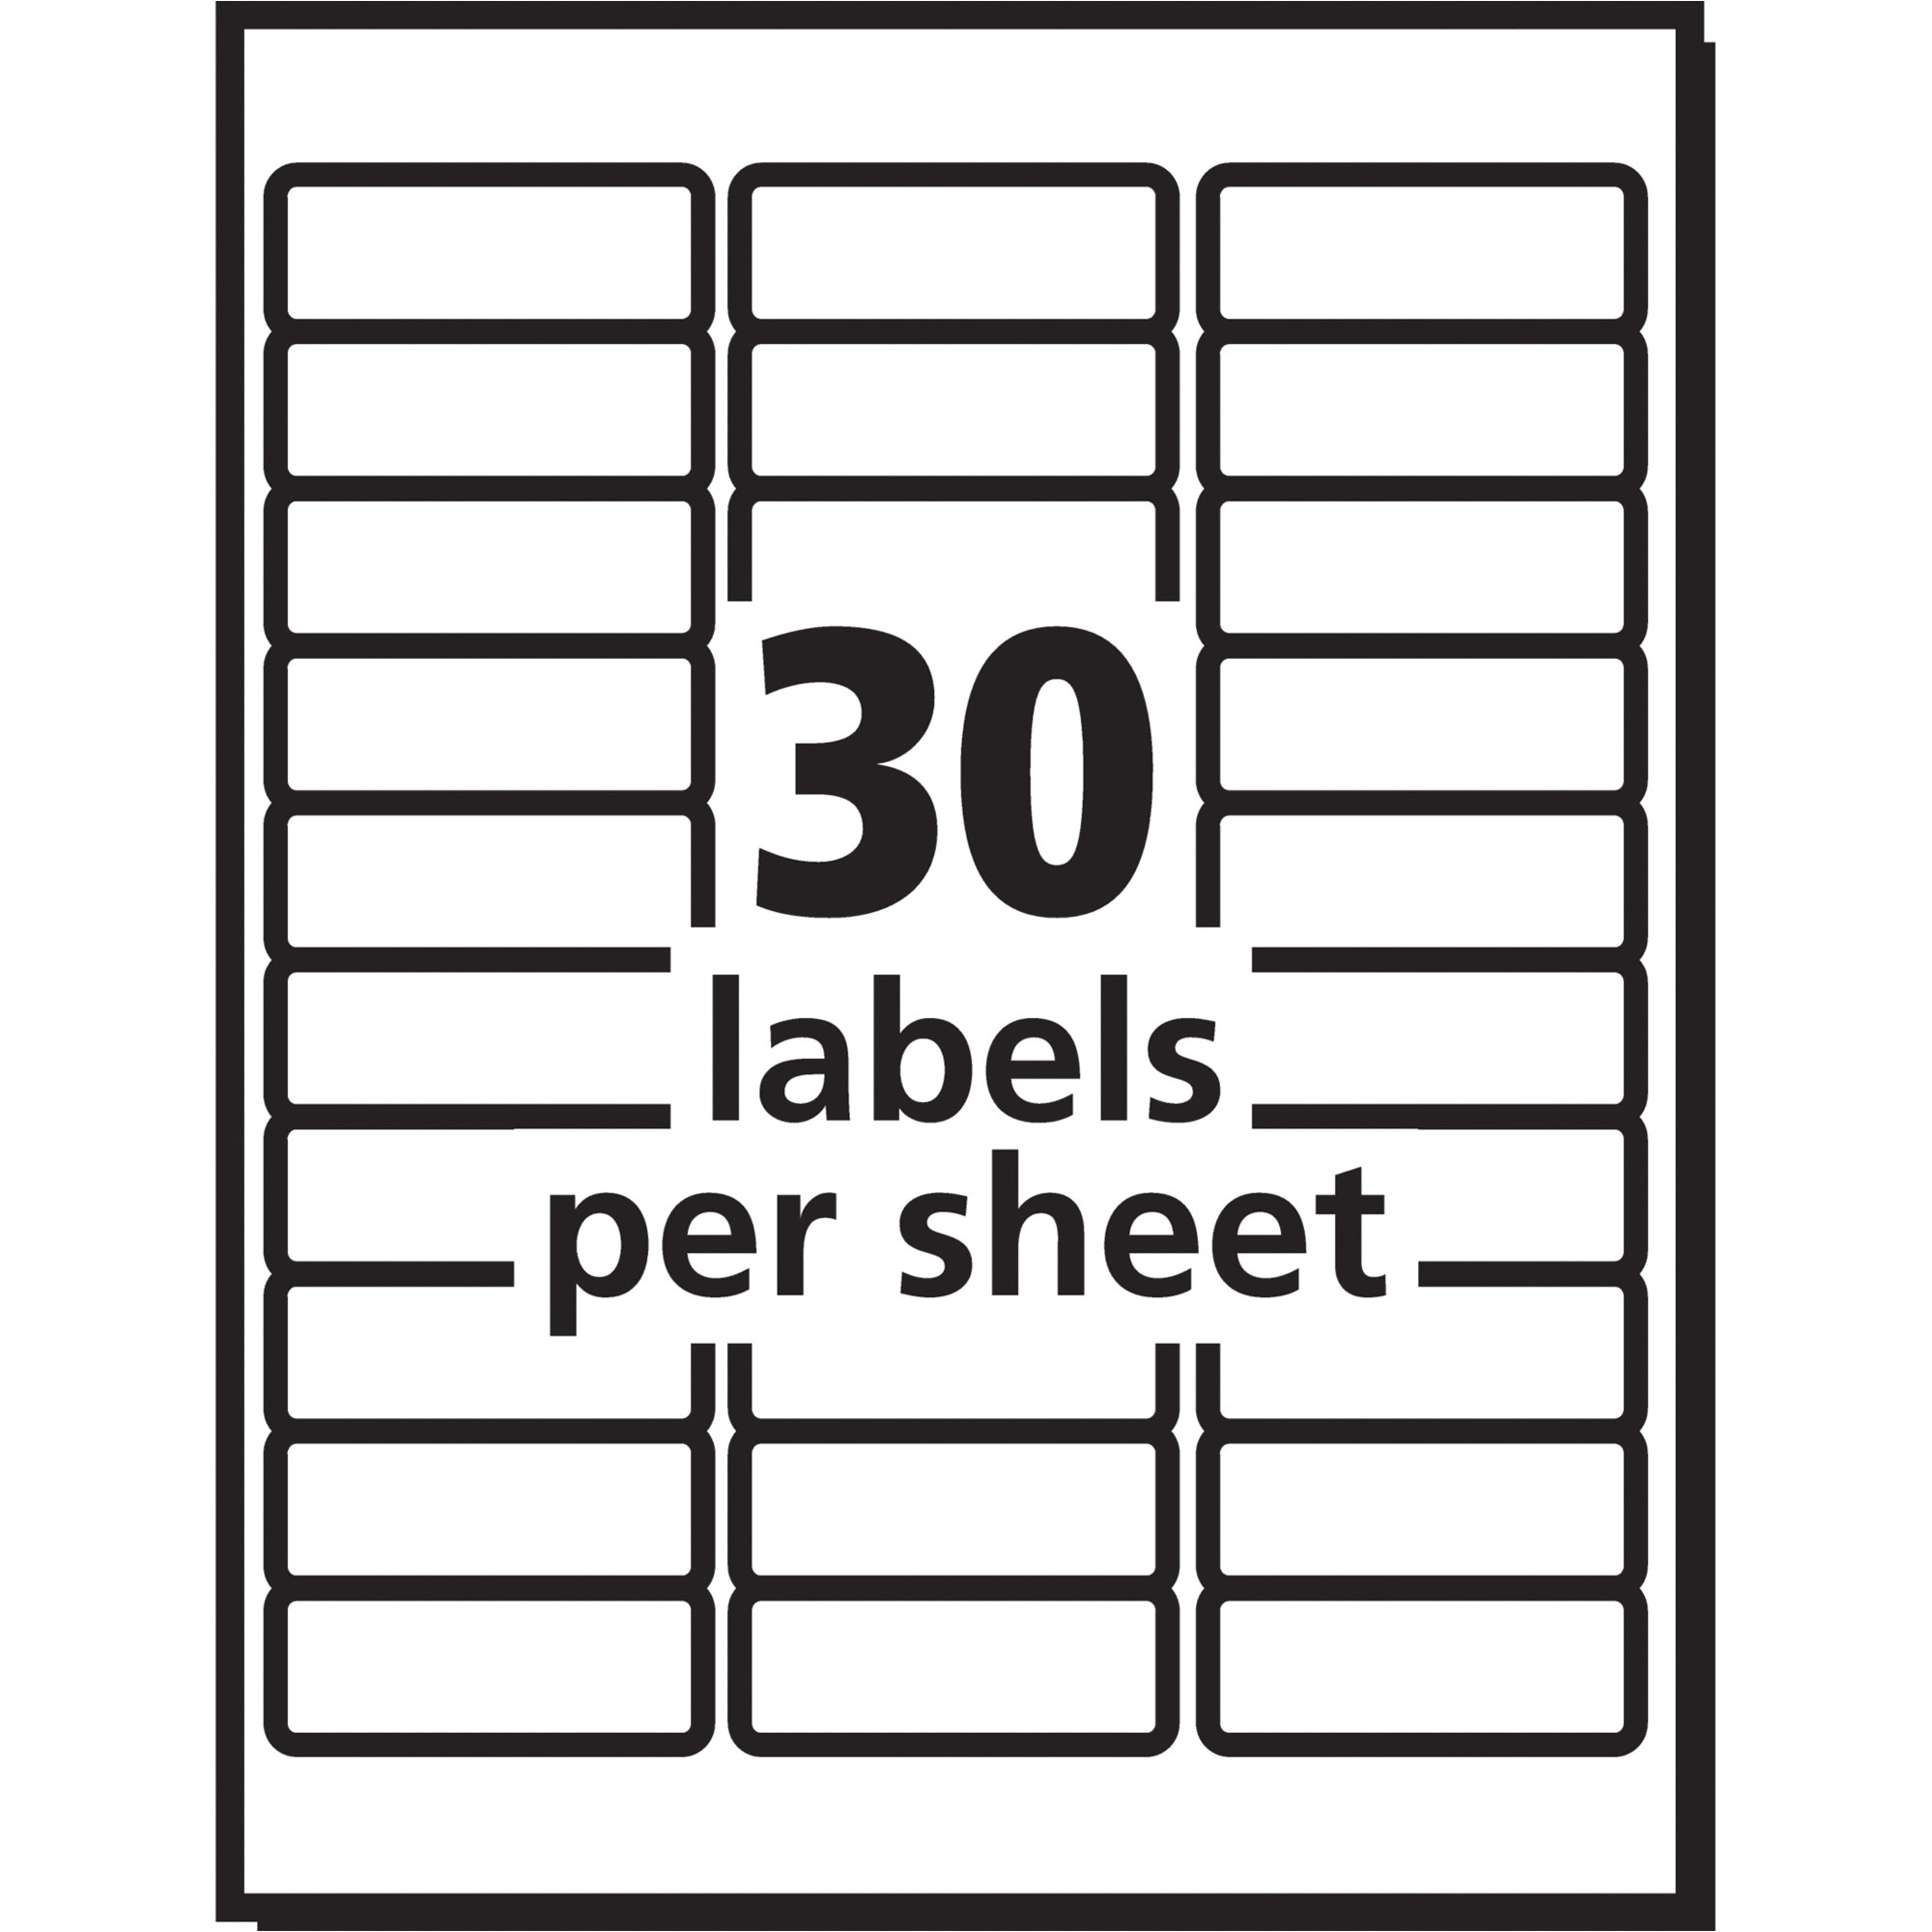 28 Avery 5960 Labels Template In 2020 Avery Label Templates Label ...